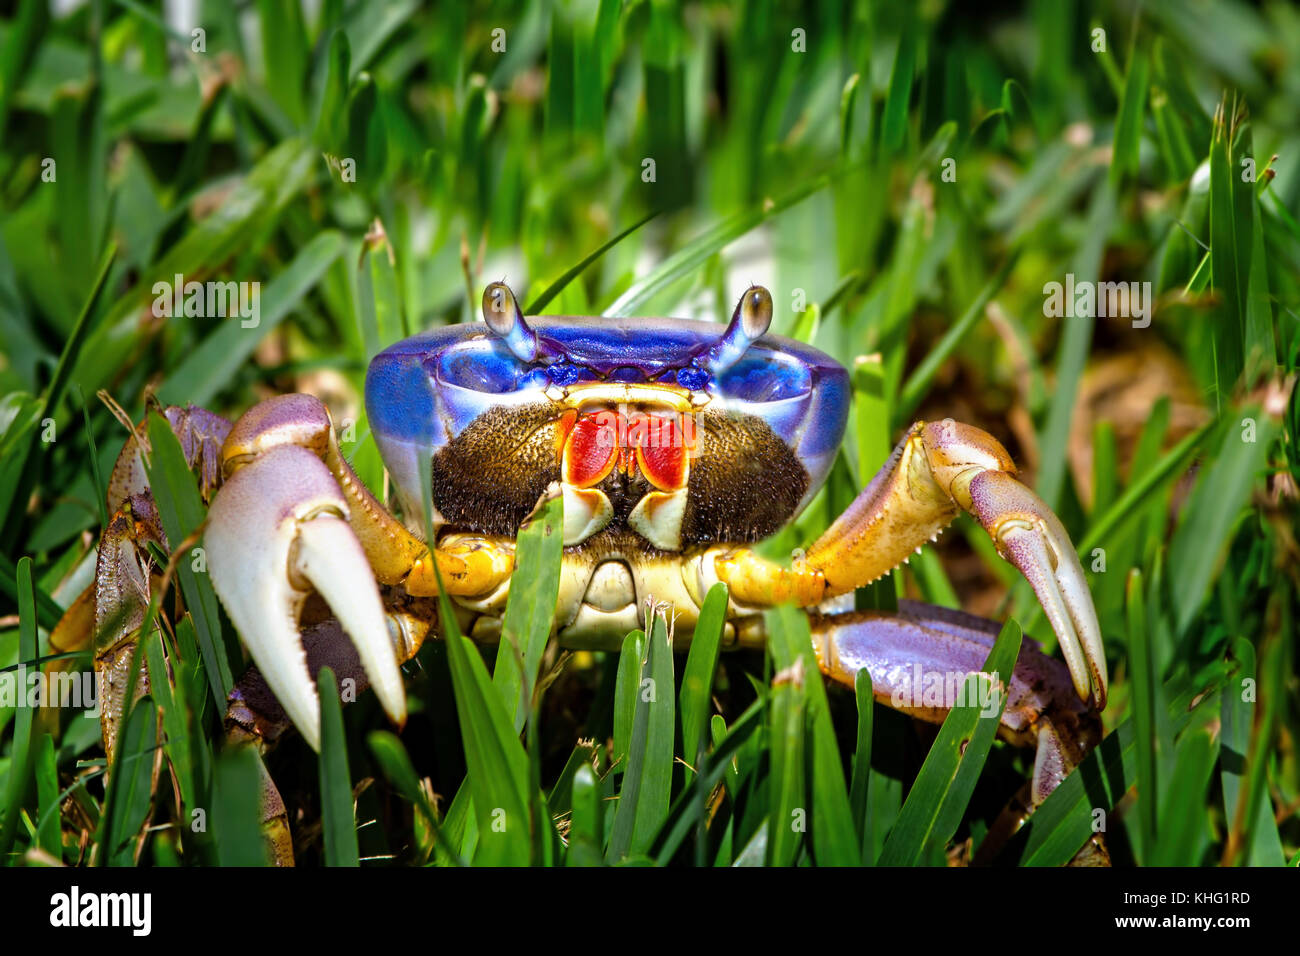 A Blue Land Crab poses for a close up along the banks of the St. Lucie River in Florida. Photographed the day after Hurricane Irma. Stock Photo